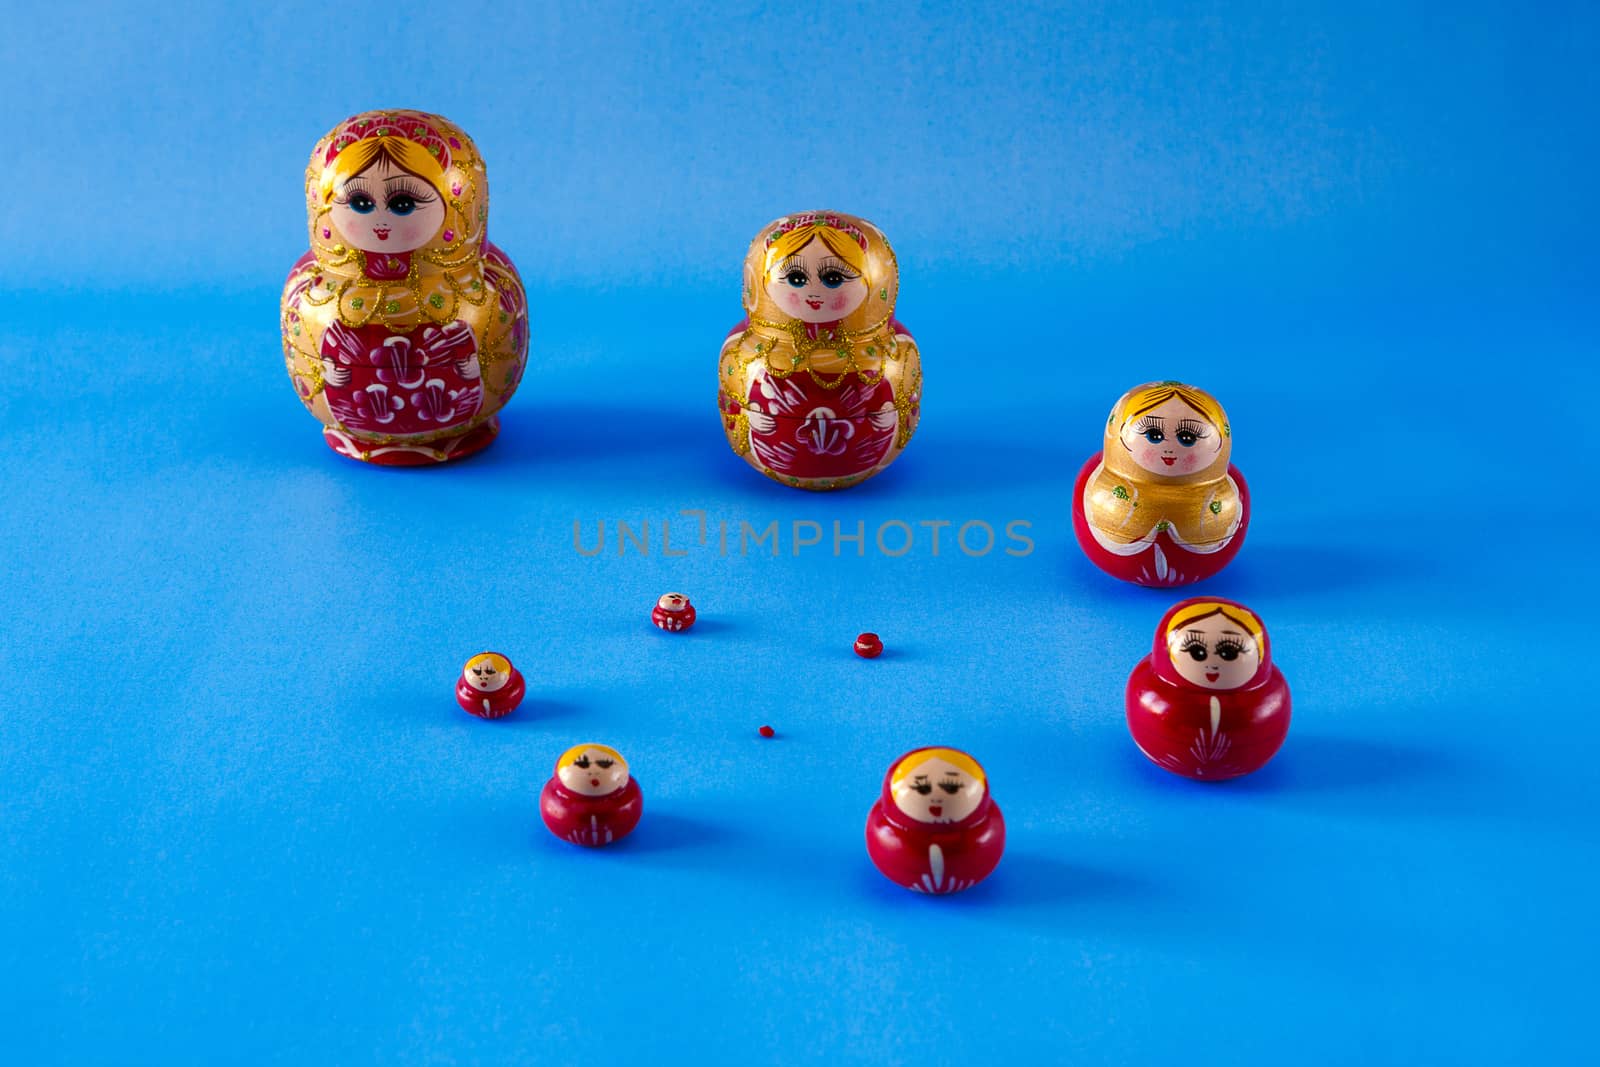 A family of matrioska in spiral on blue background